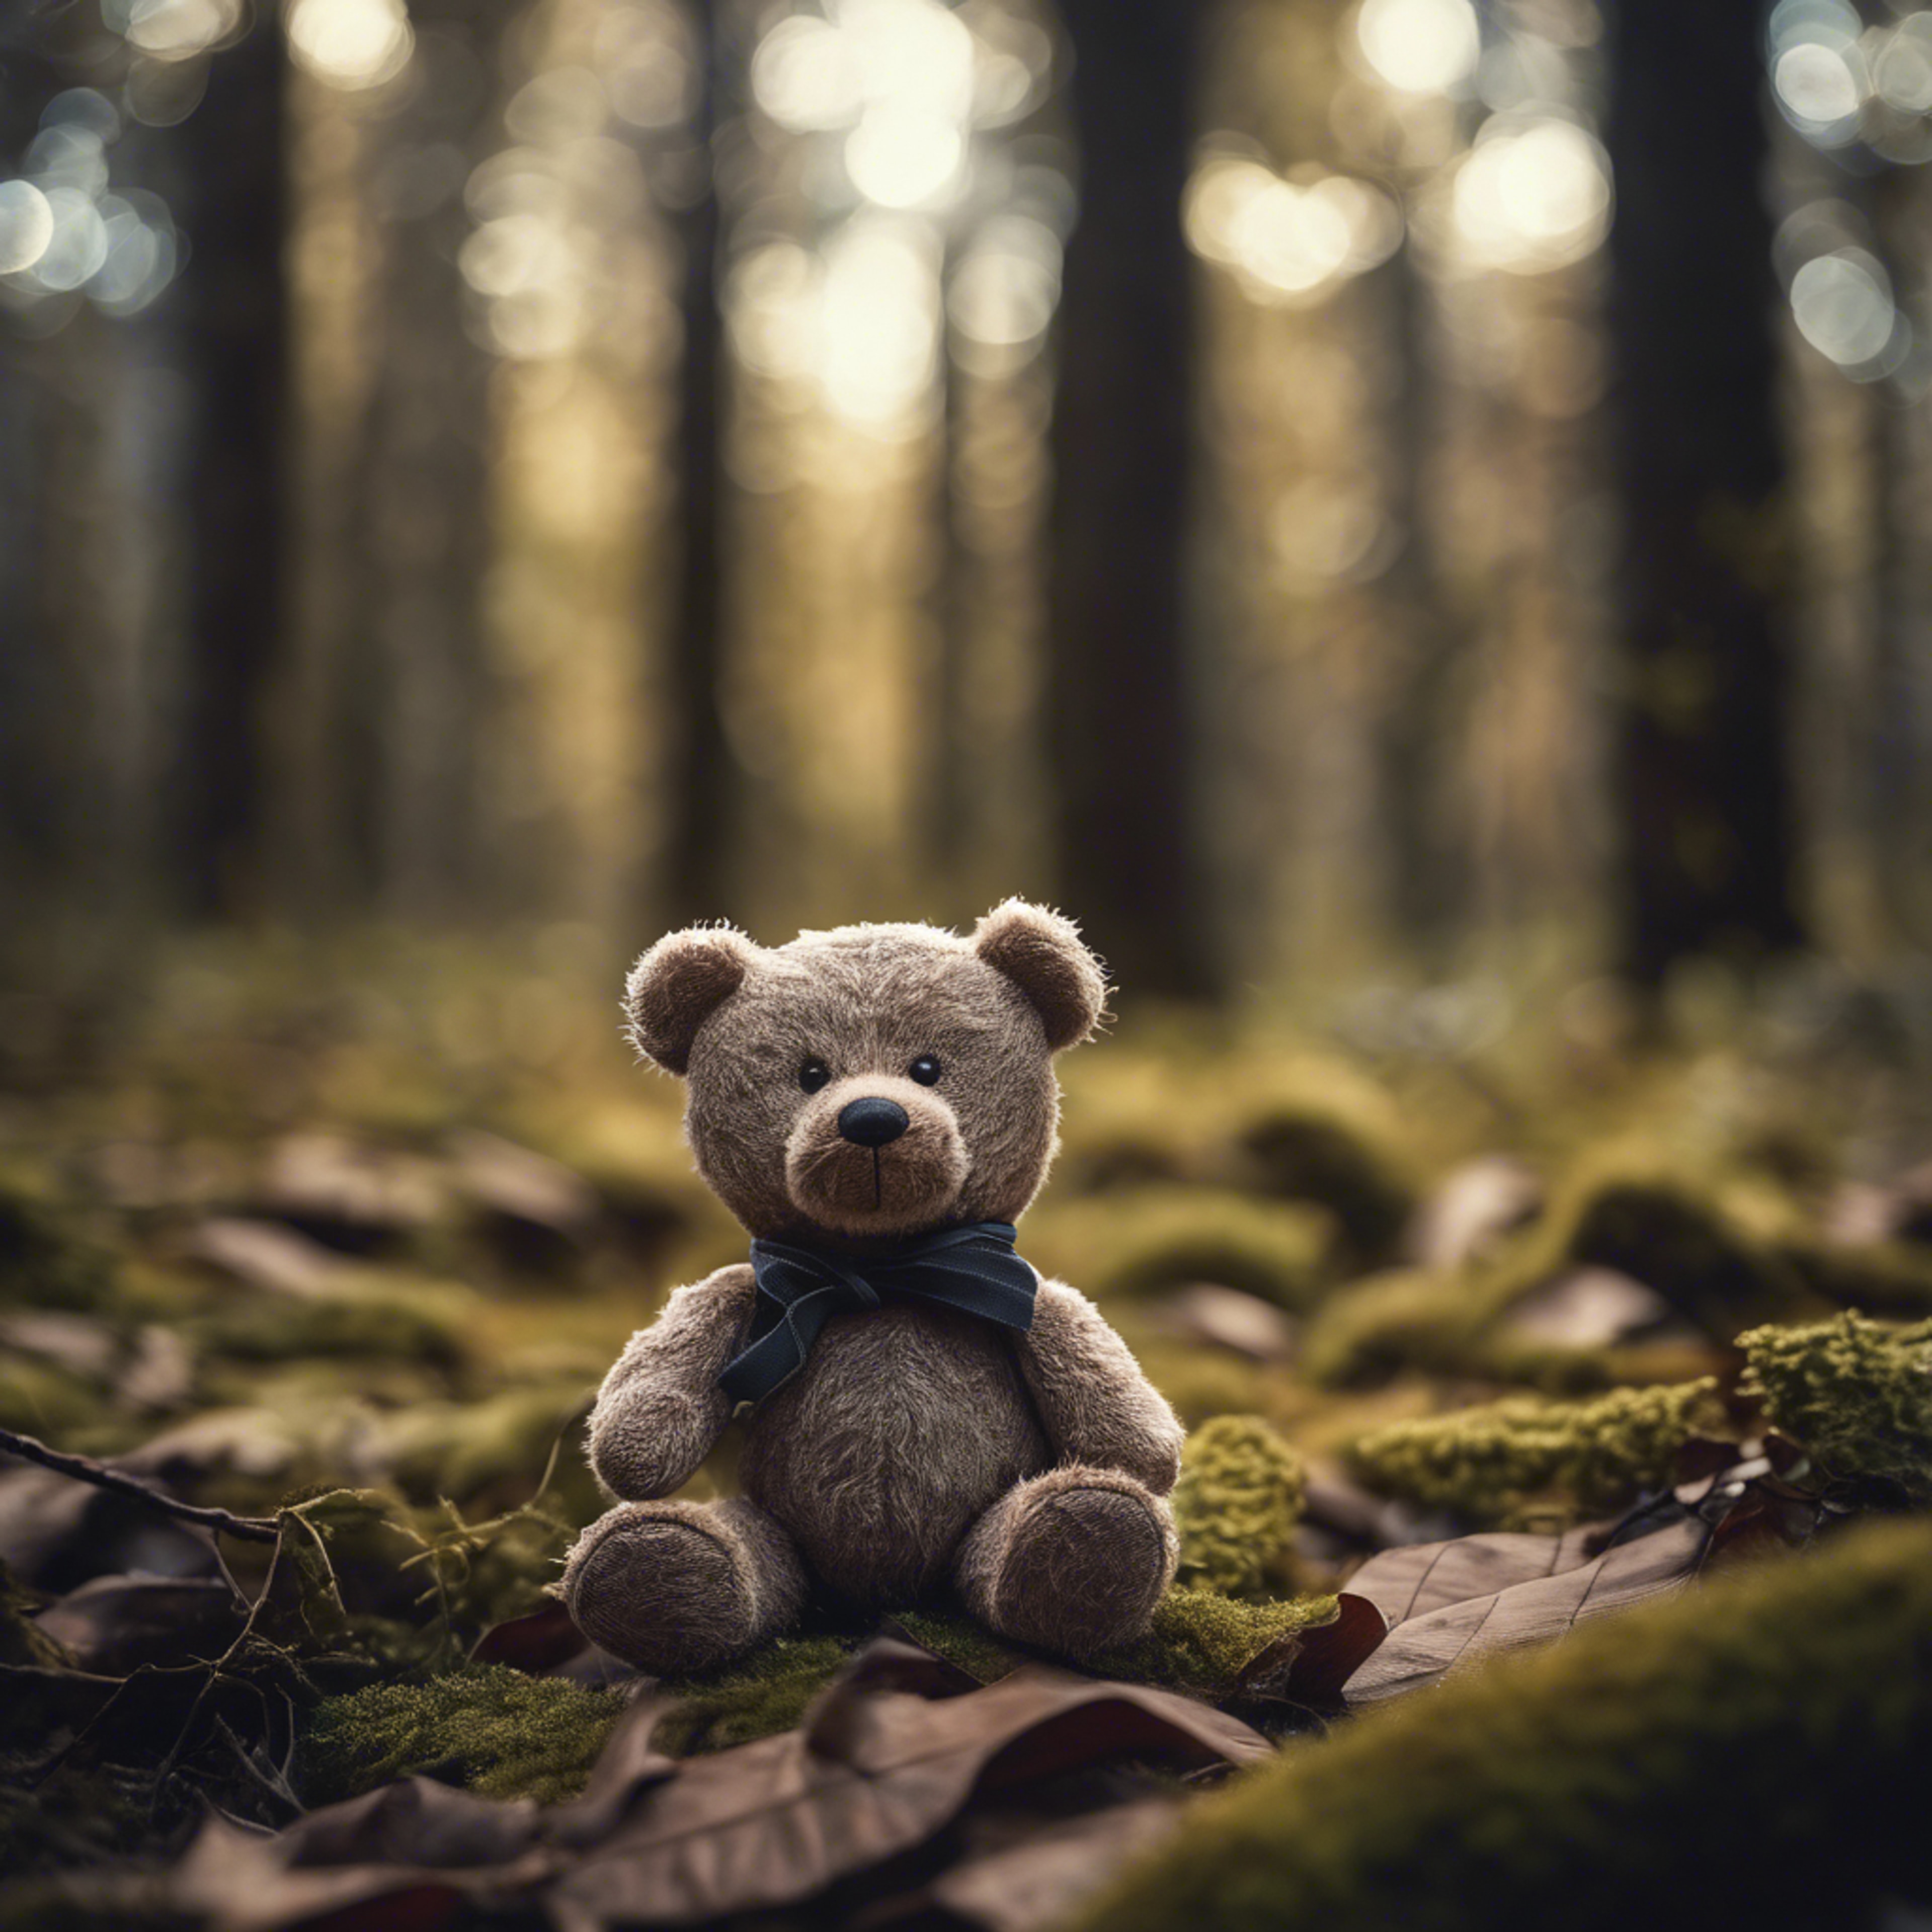 A teddy bear lost and alone in a dark forest. Tapeta na zeď[4d225efade314682baea]